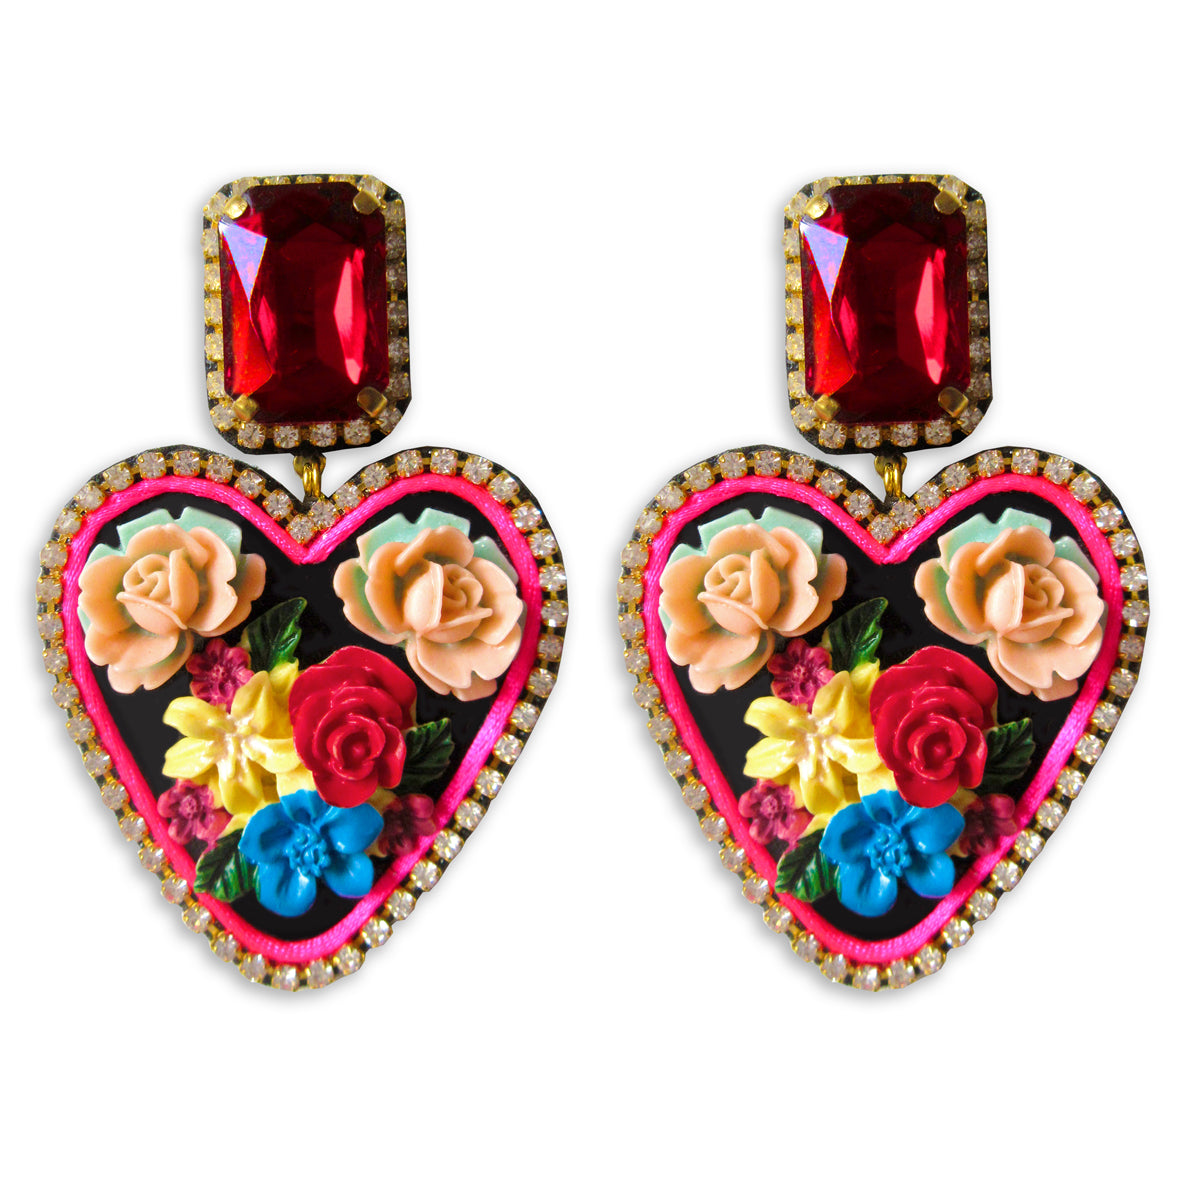 Mouchkine Jewelry floral heart haute couture earrings. 